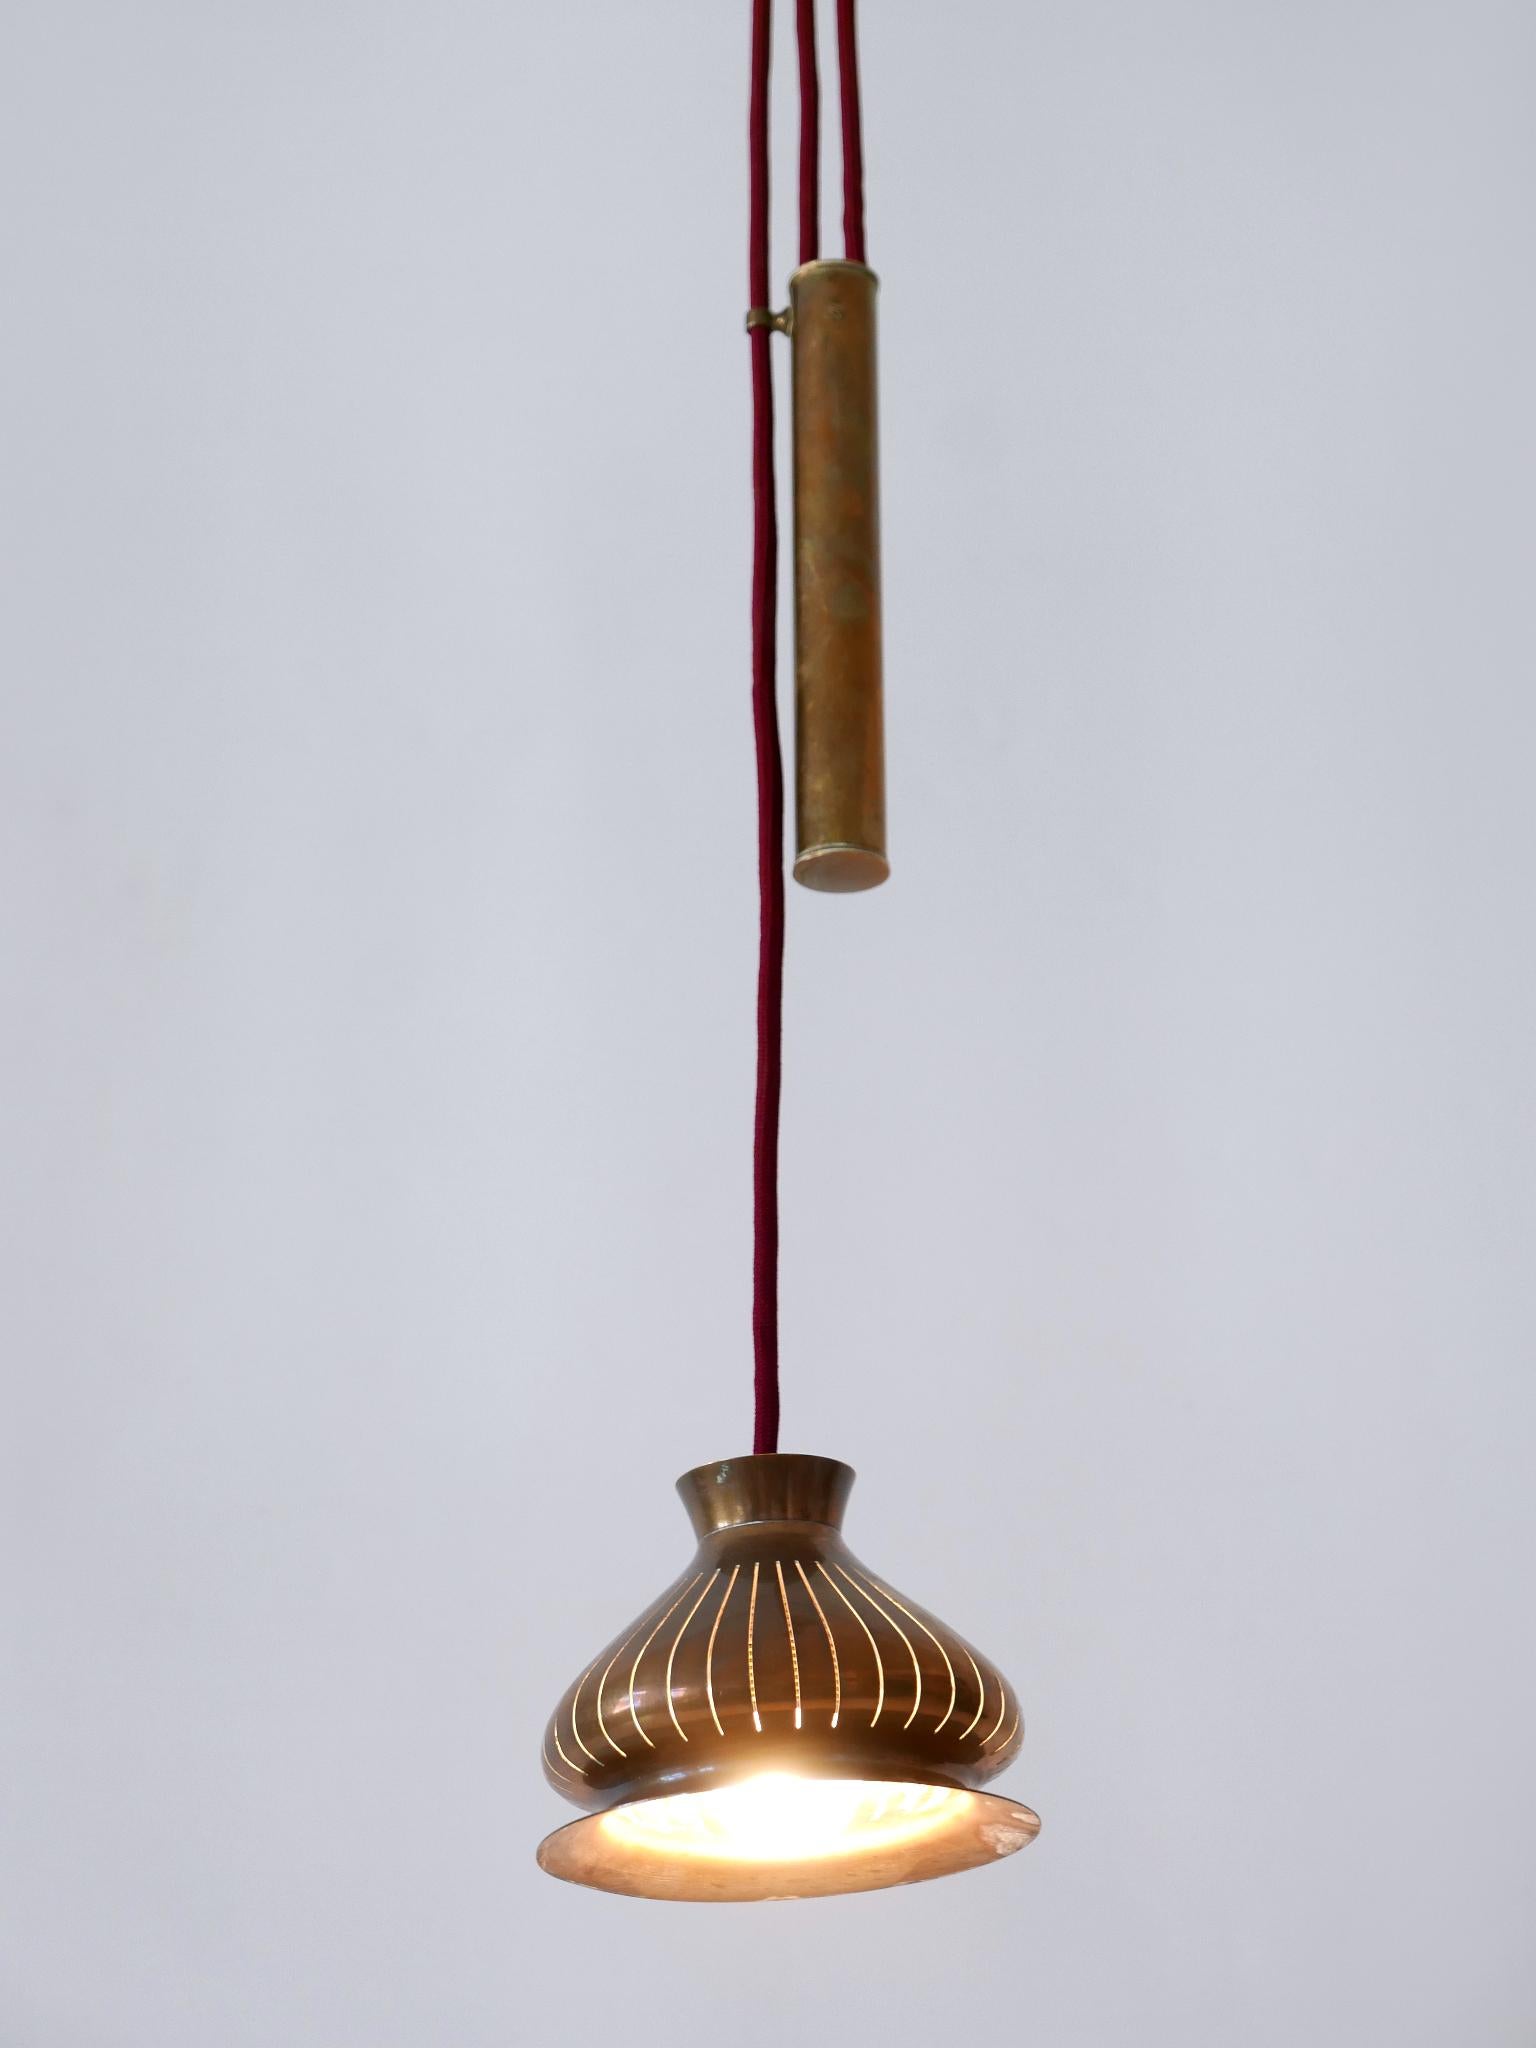 Extremely Rare Mid Century Modern Counterweight Brass Pendant Lamp Germany 1950s For Sale 2